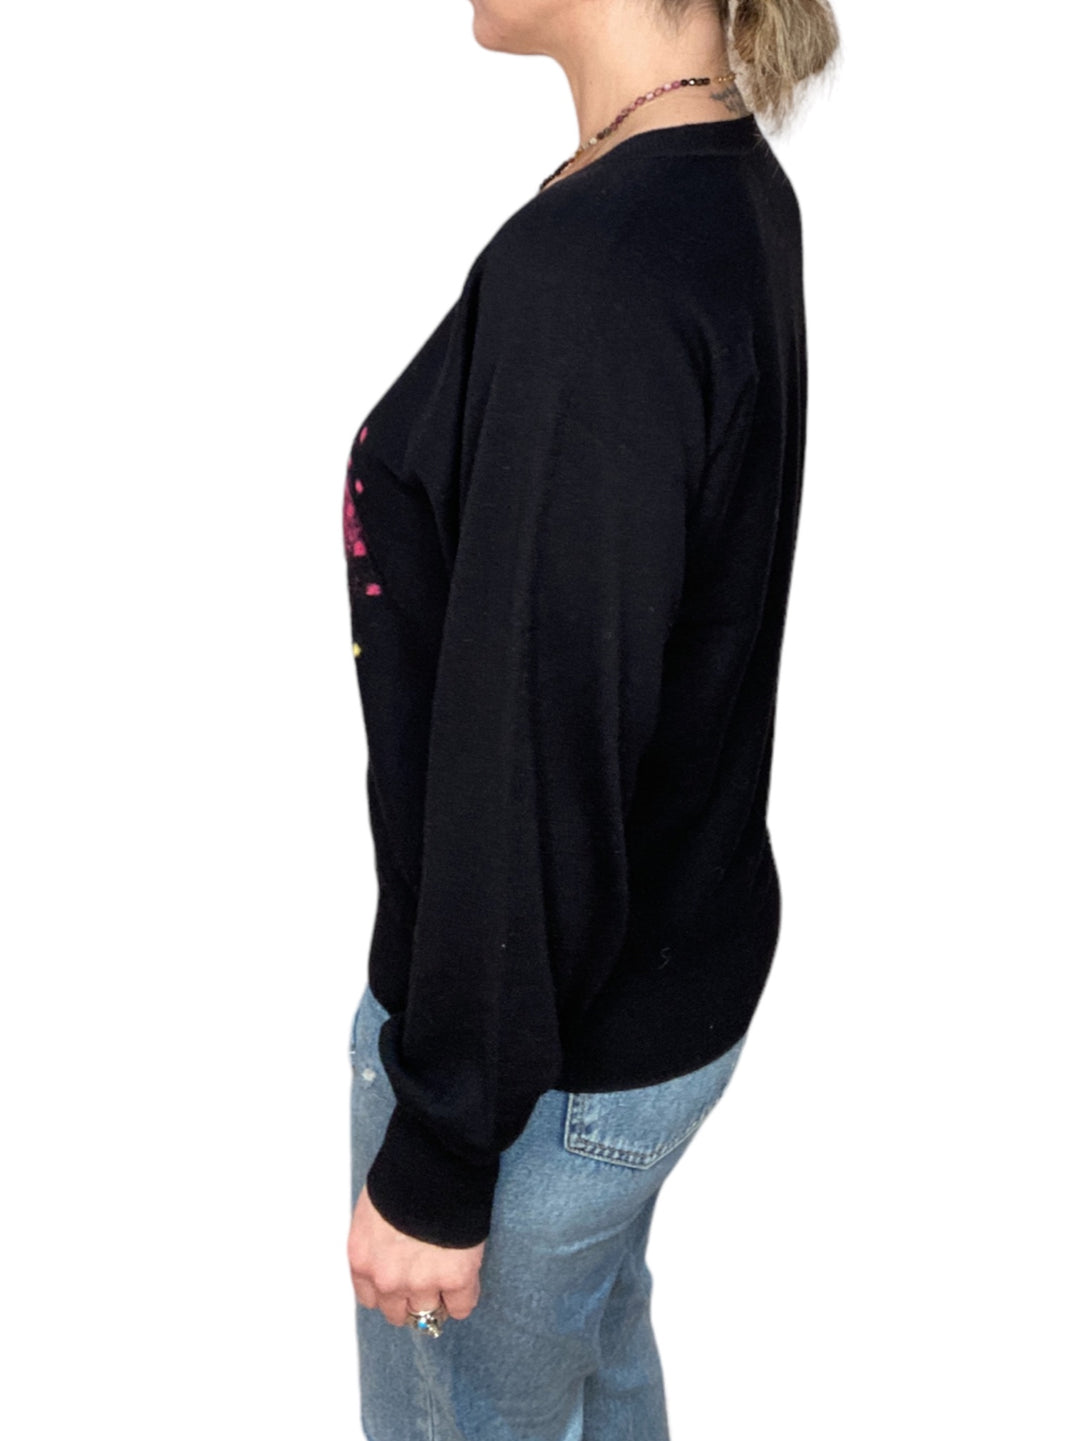 COTTON CASHMERE V-NECK UNITED HEART SWEATER-BLACKLEAD - Kingfisher Road - Online Boutique